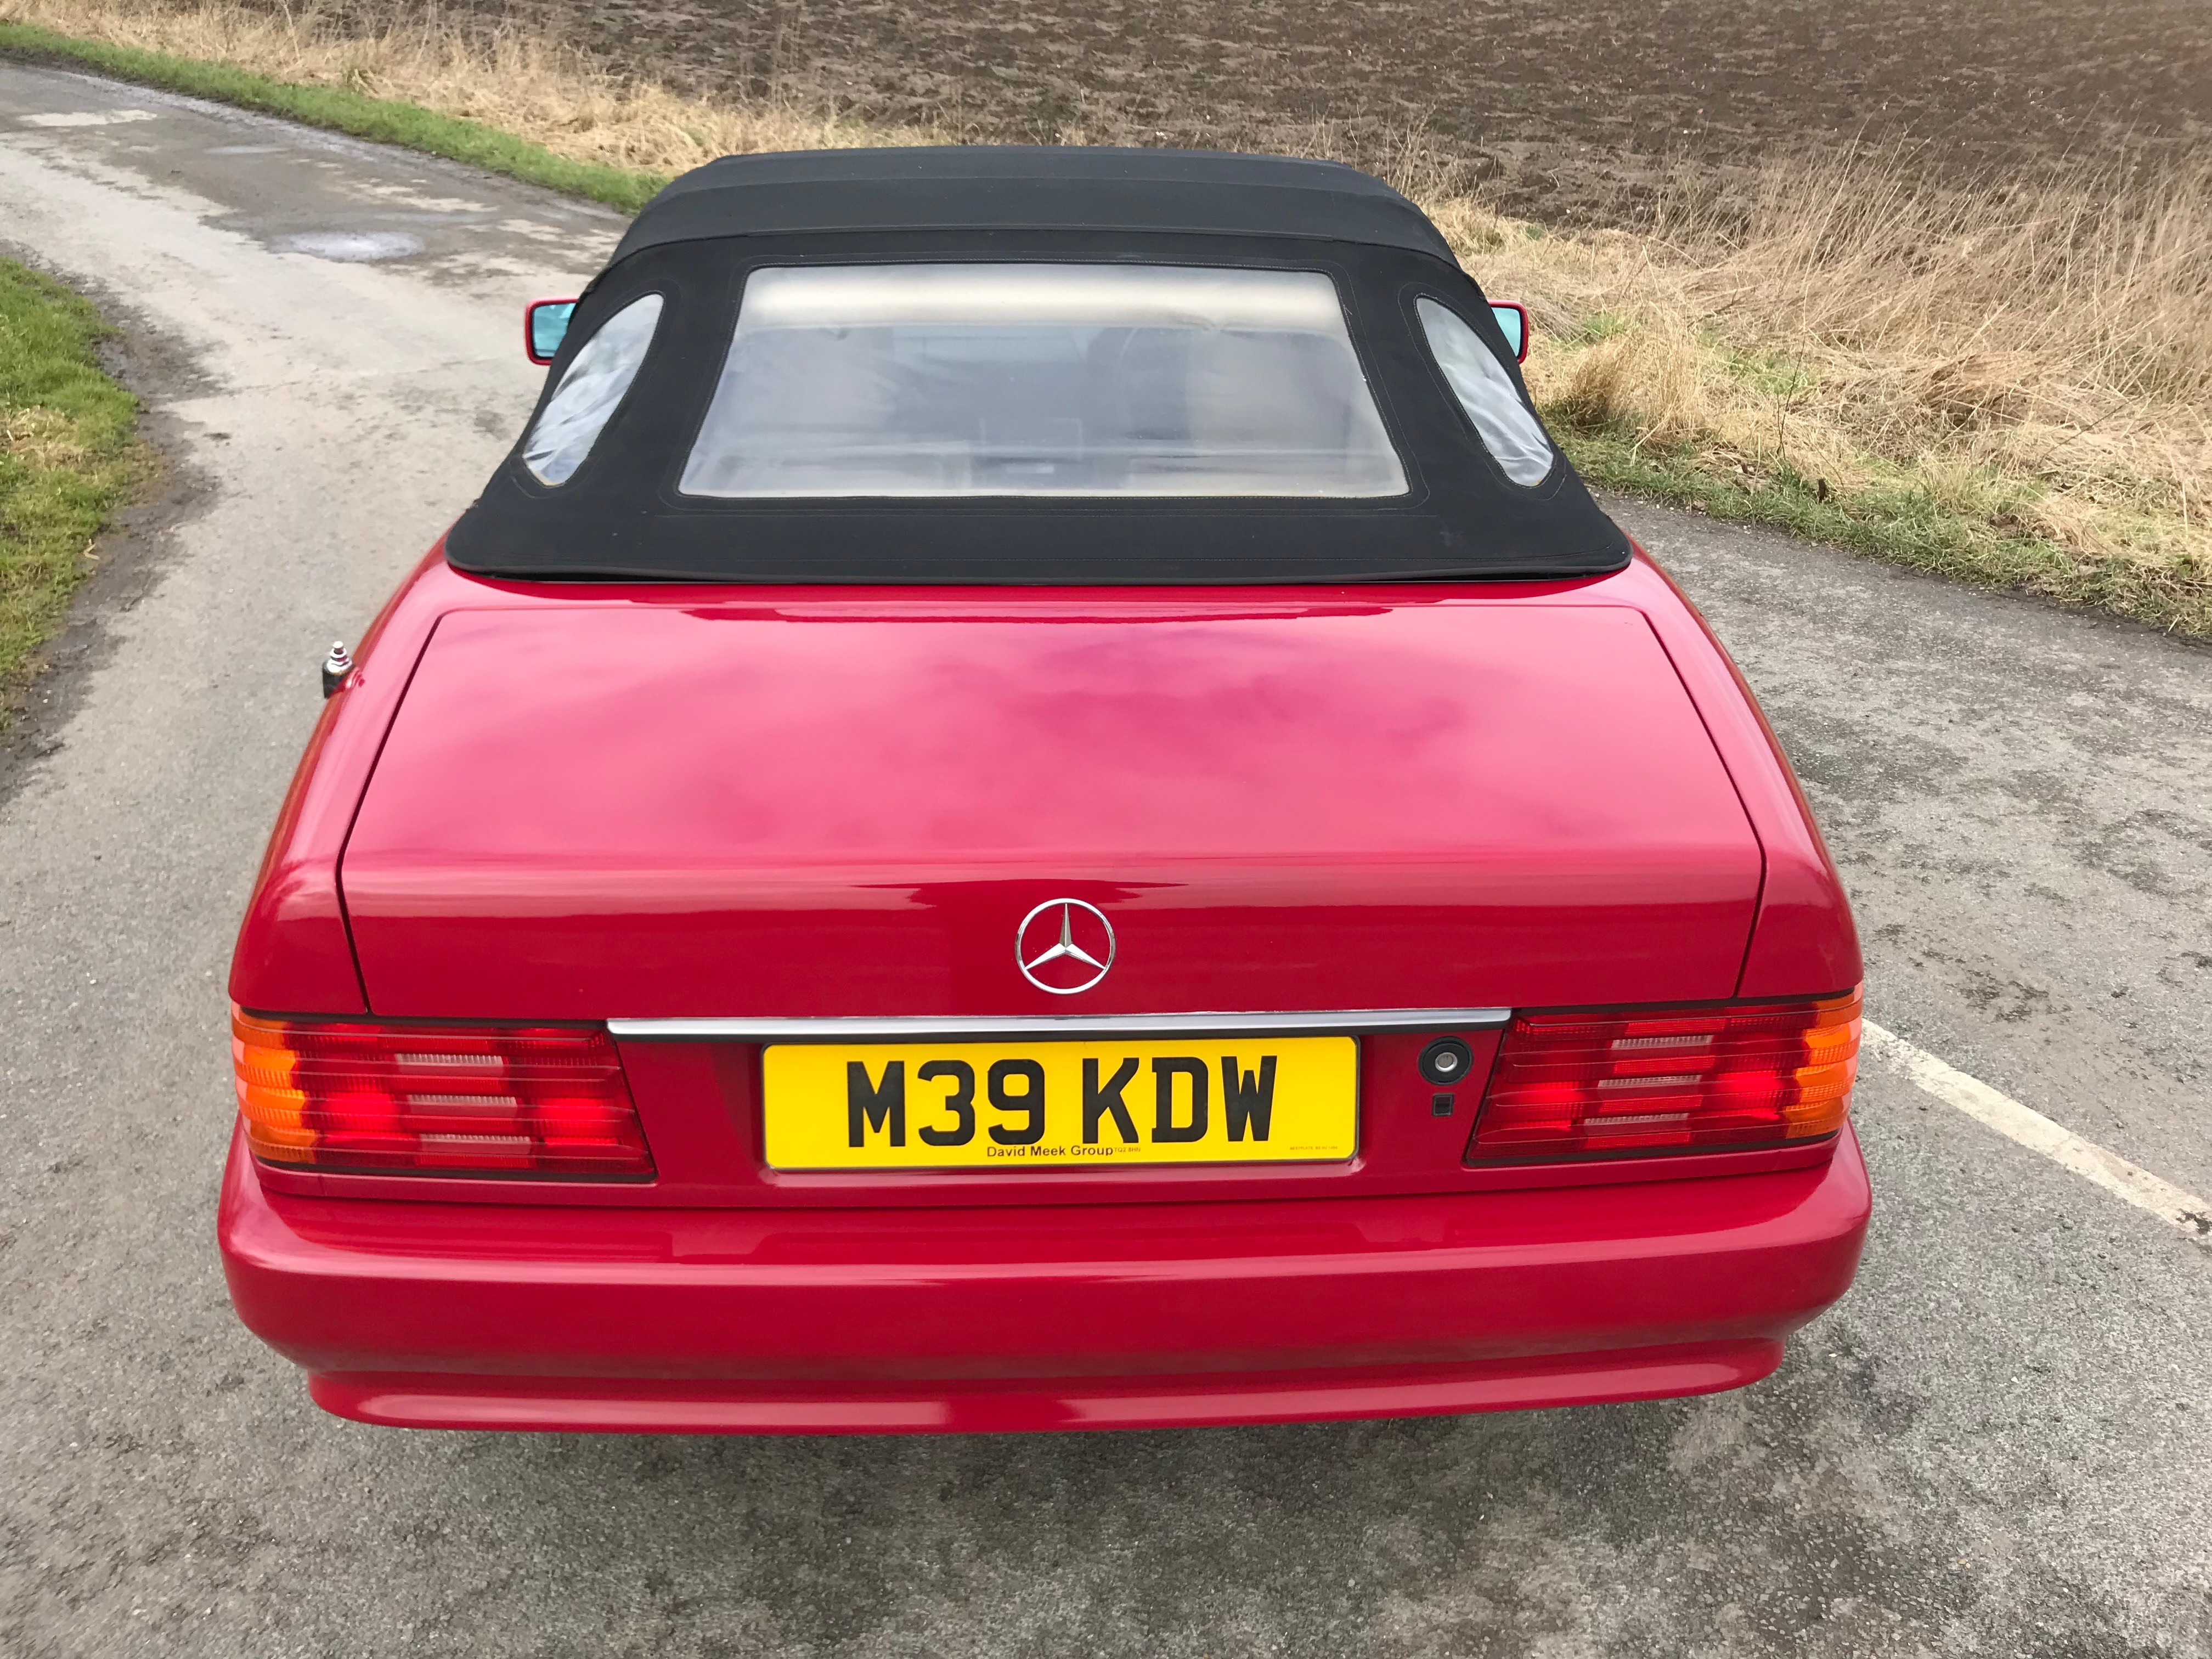 1994 Mercedes 280 SL Convertible Automatic - Image 8 of 49